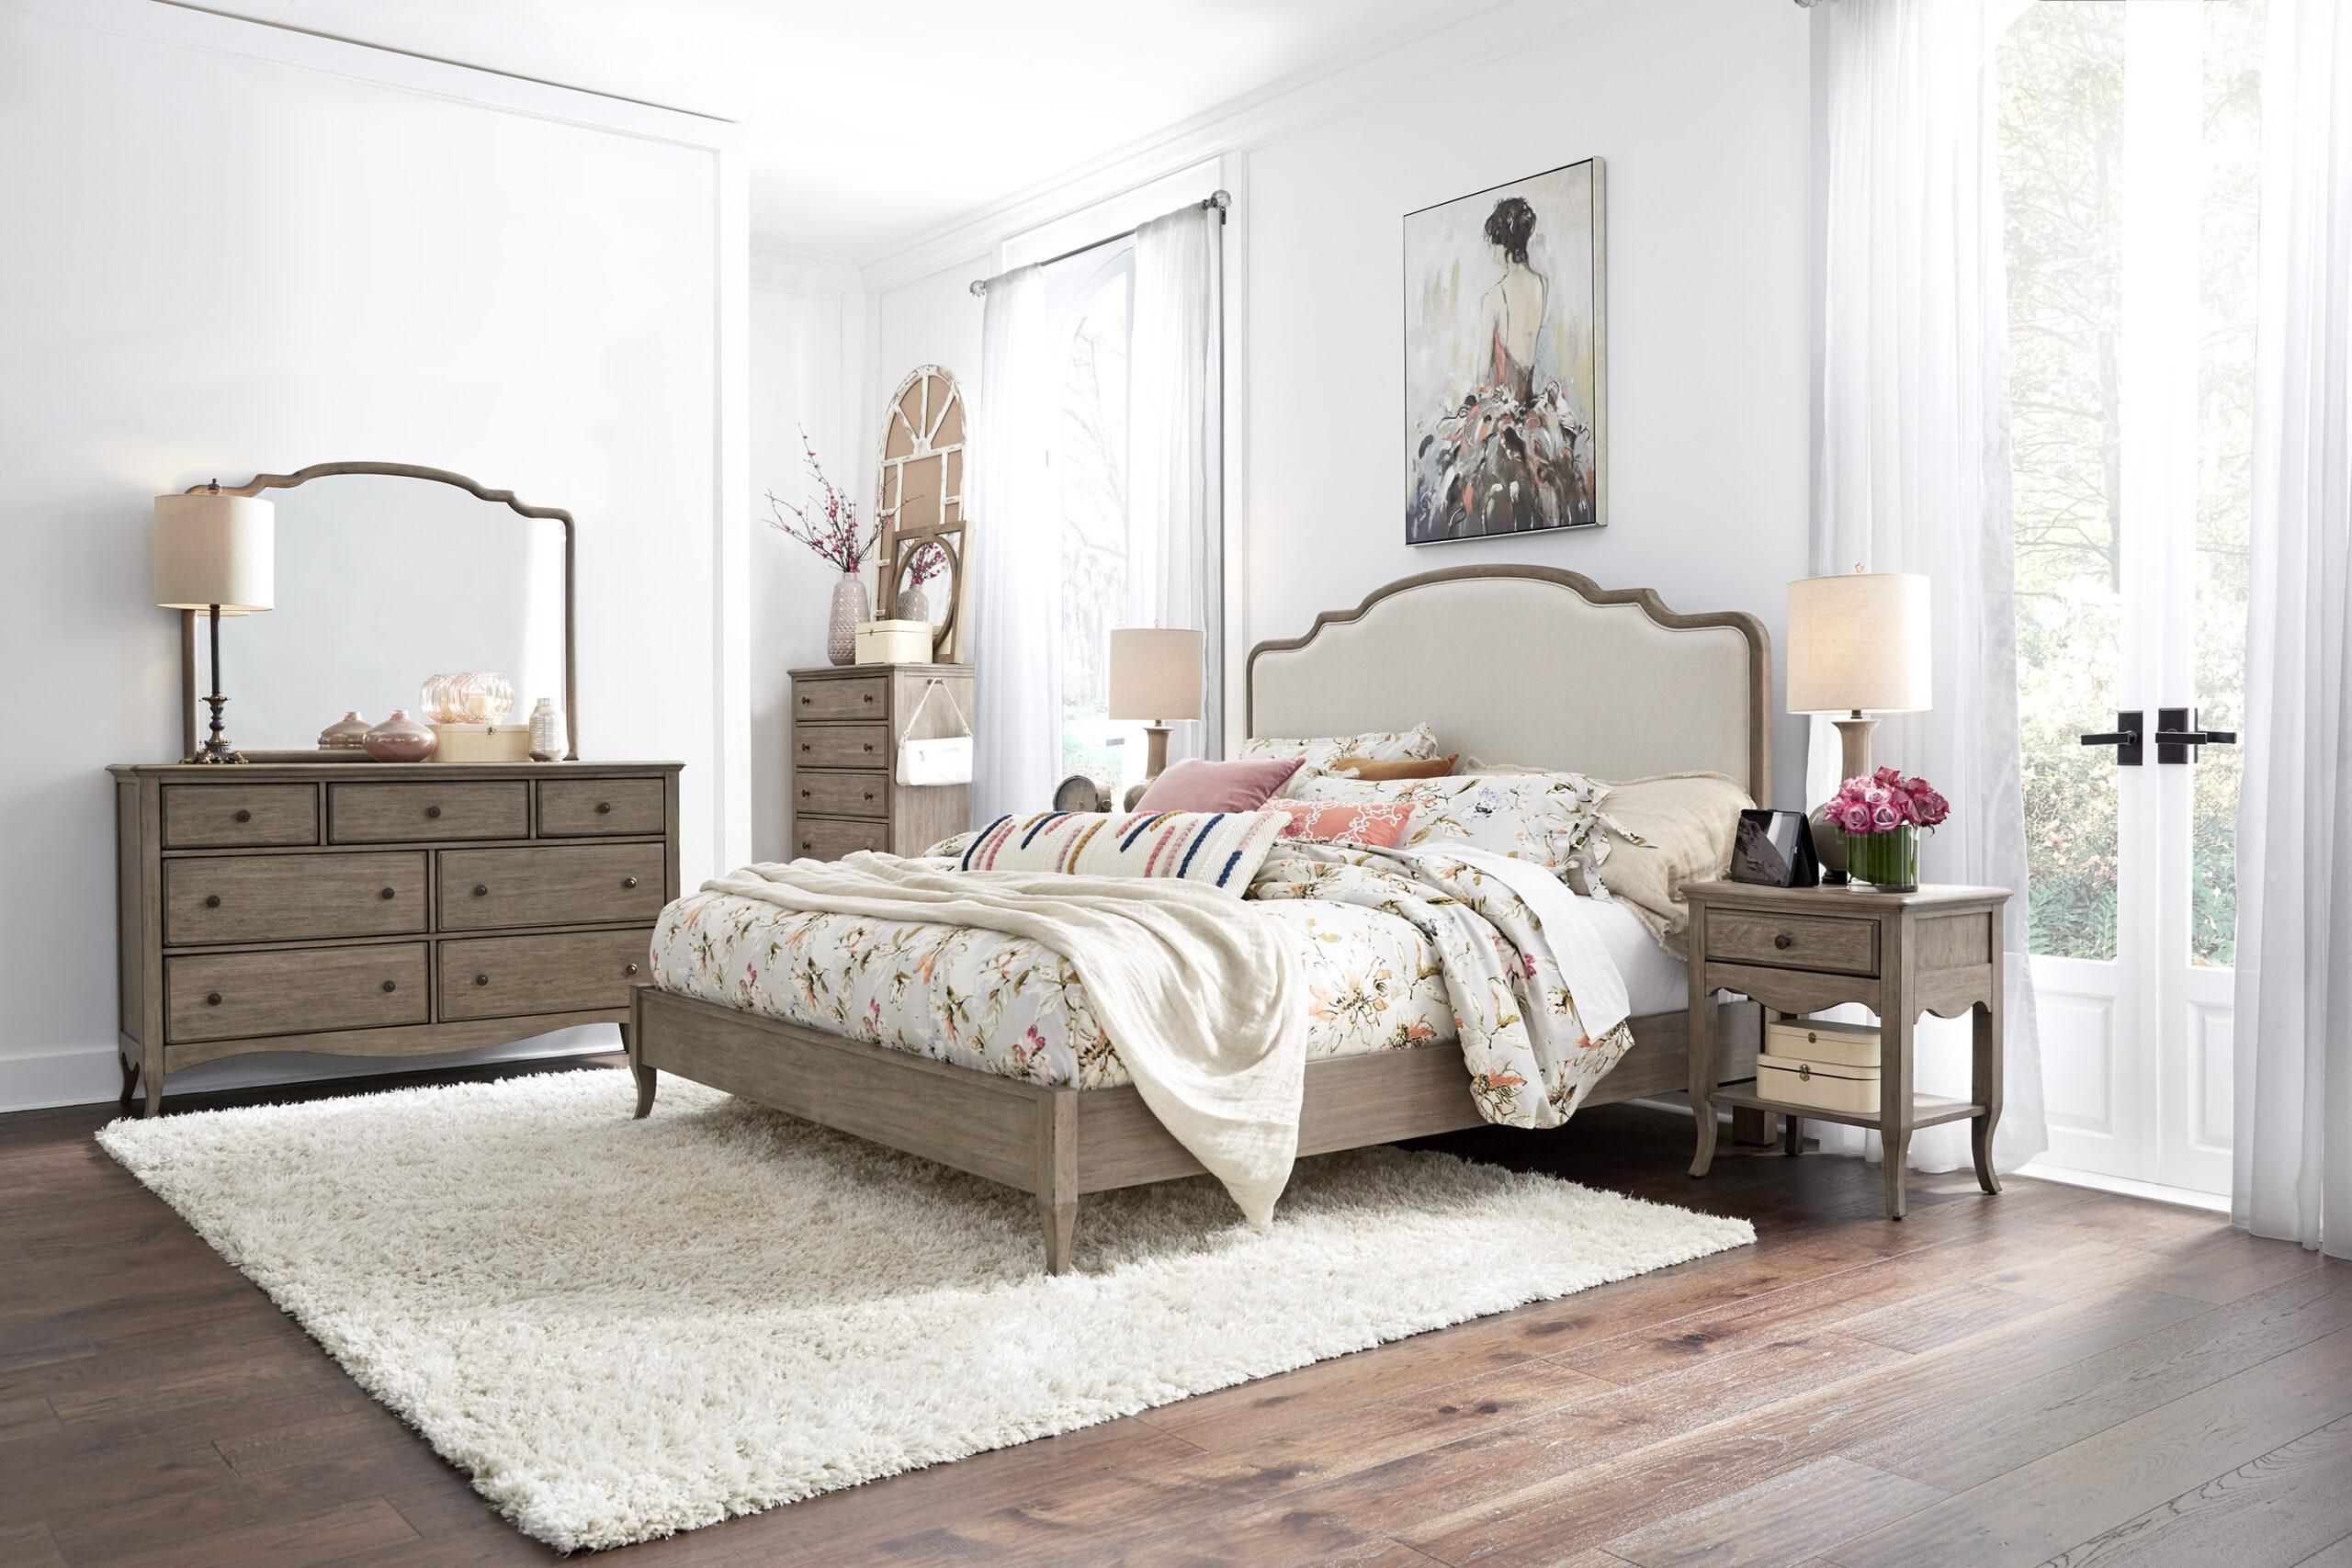 Provence King Bed